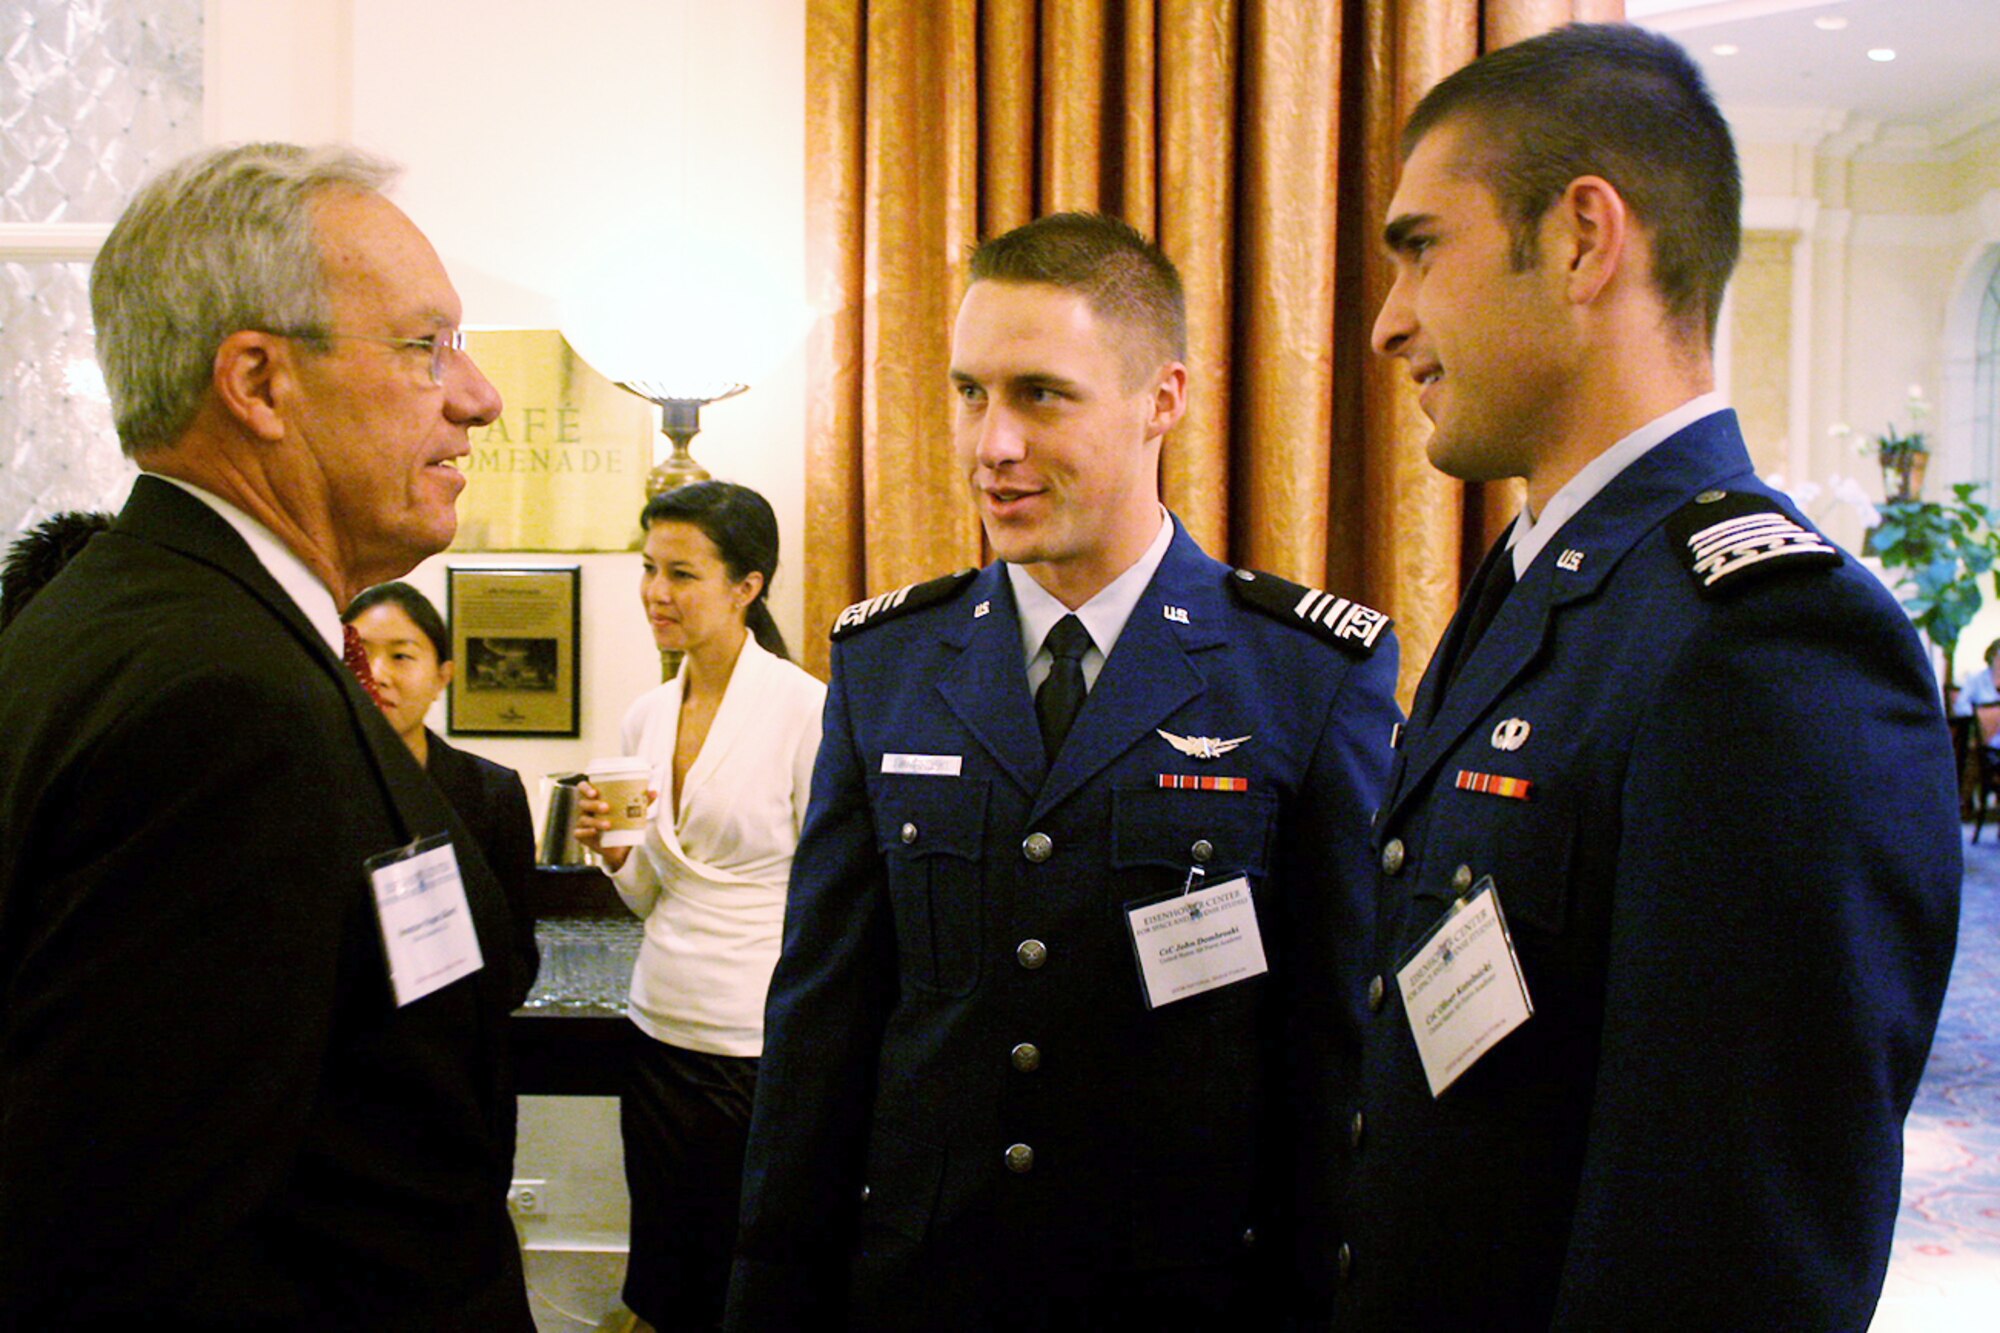 Former Colorado Sen. Wayne Allard, left, talks with Cadets 1st Class John Dombroski and Oliver Kotelnicki during the Project on Strategic Space Issues in Washington, D.C., Sept. 1, 2009. Throughout the three-day event, more than 180 commercial space professionals, former Eisenhower Summer Space Seminar alumni, Air Force Academy cadets and military and government space policy makers addressed U.S. space policy issues. (U.S. Air Force photo)